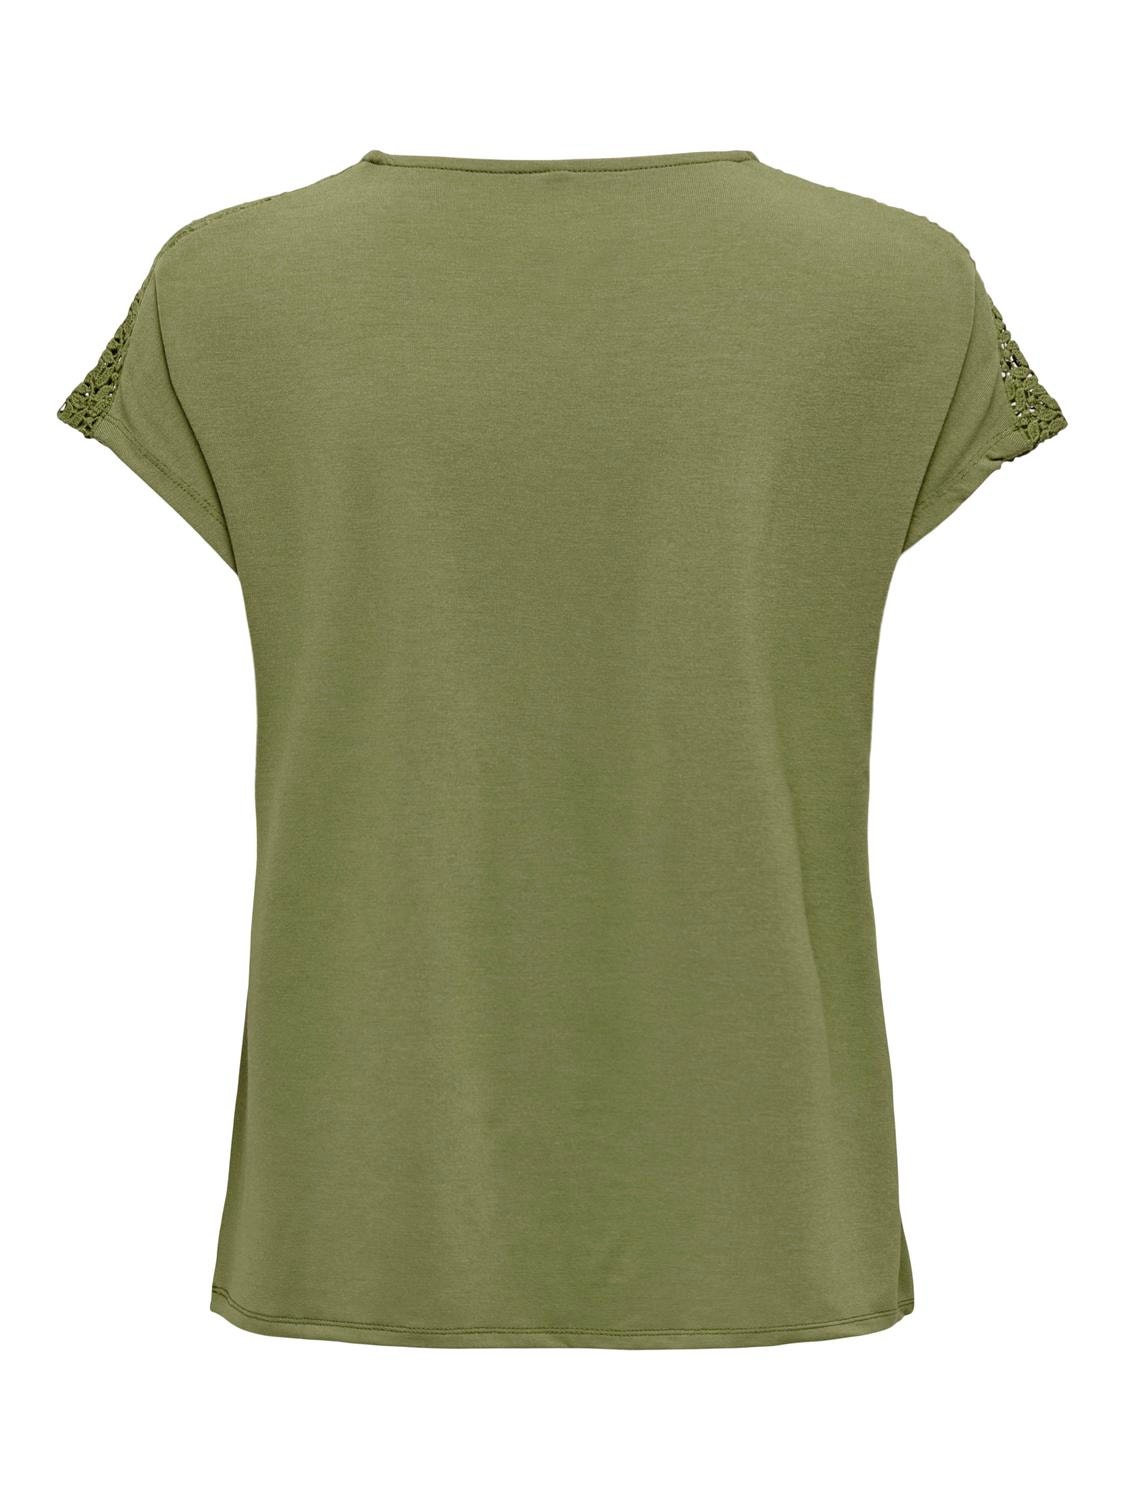 ONLY Regular Fit Round Neck Top -Martini Olive - 15289589